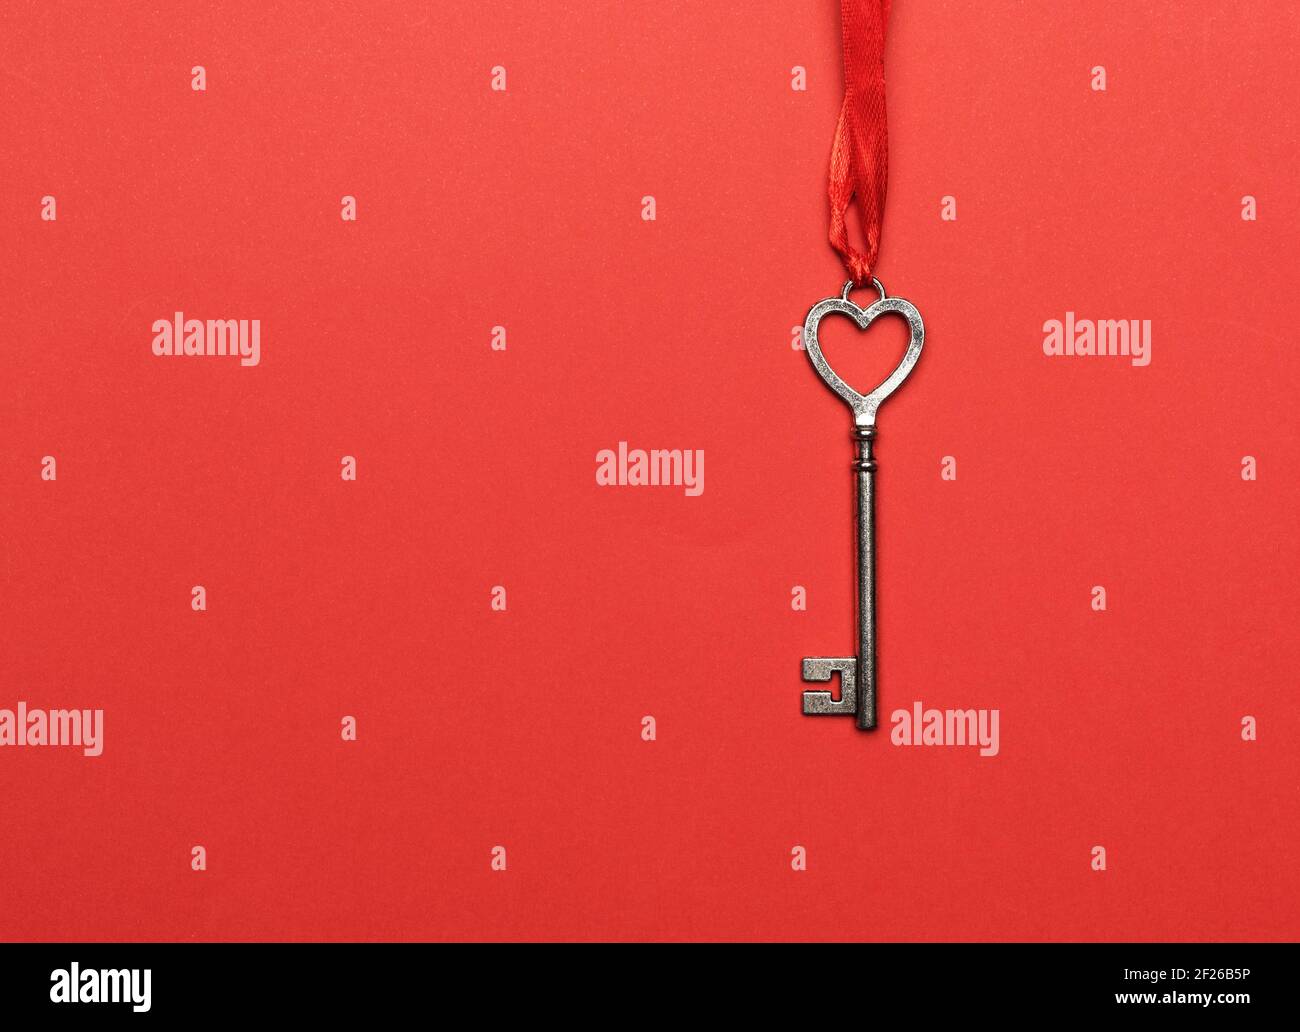 Metal key hanging on a red ribbon, red background Stock Photo - Alamy